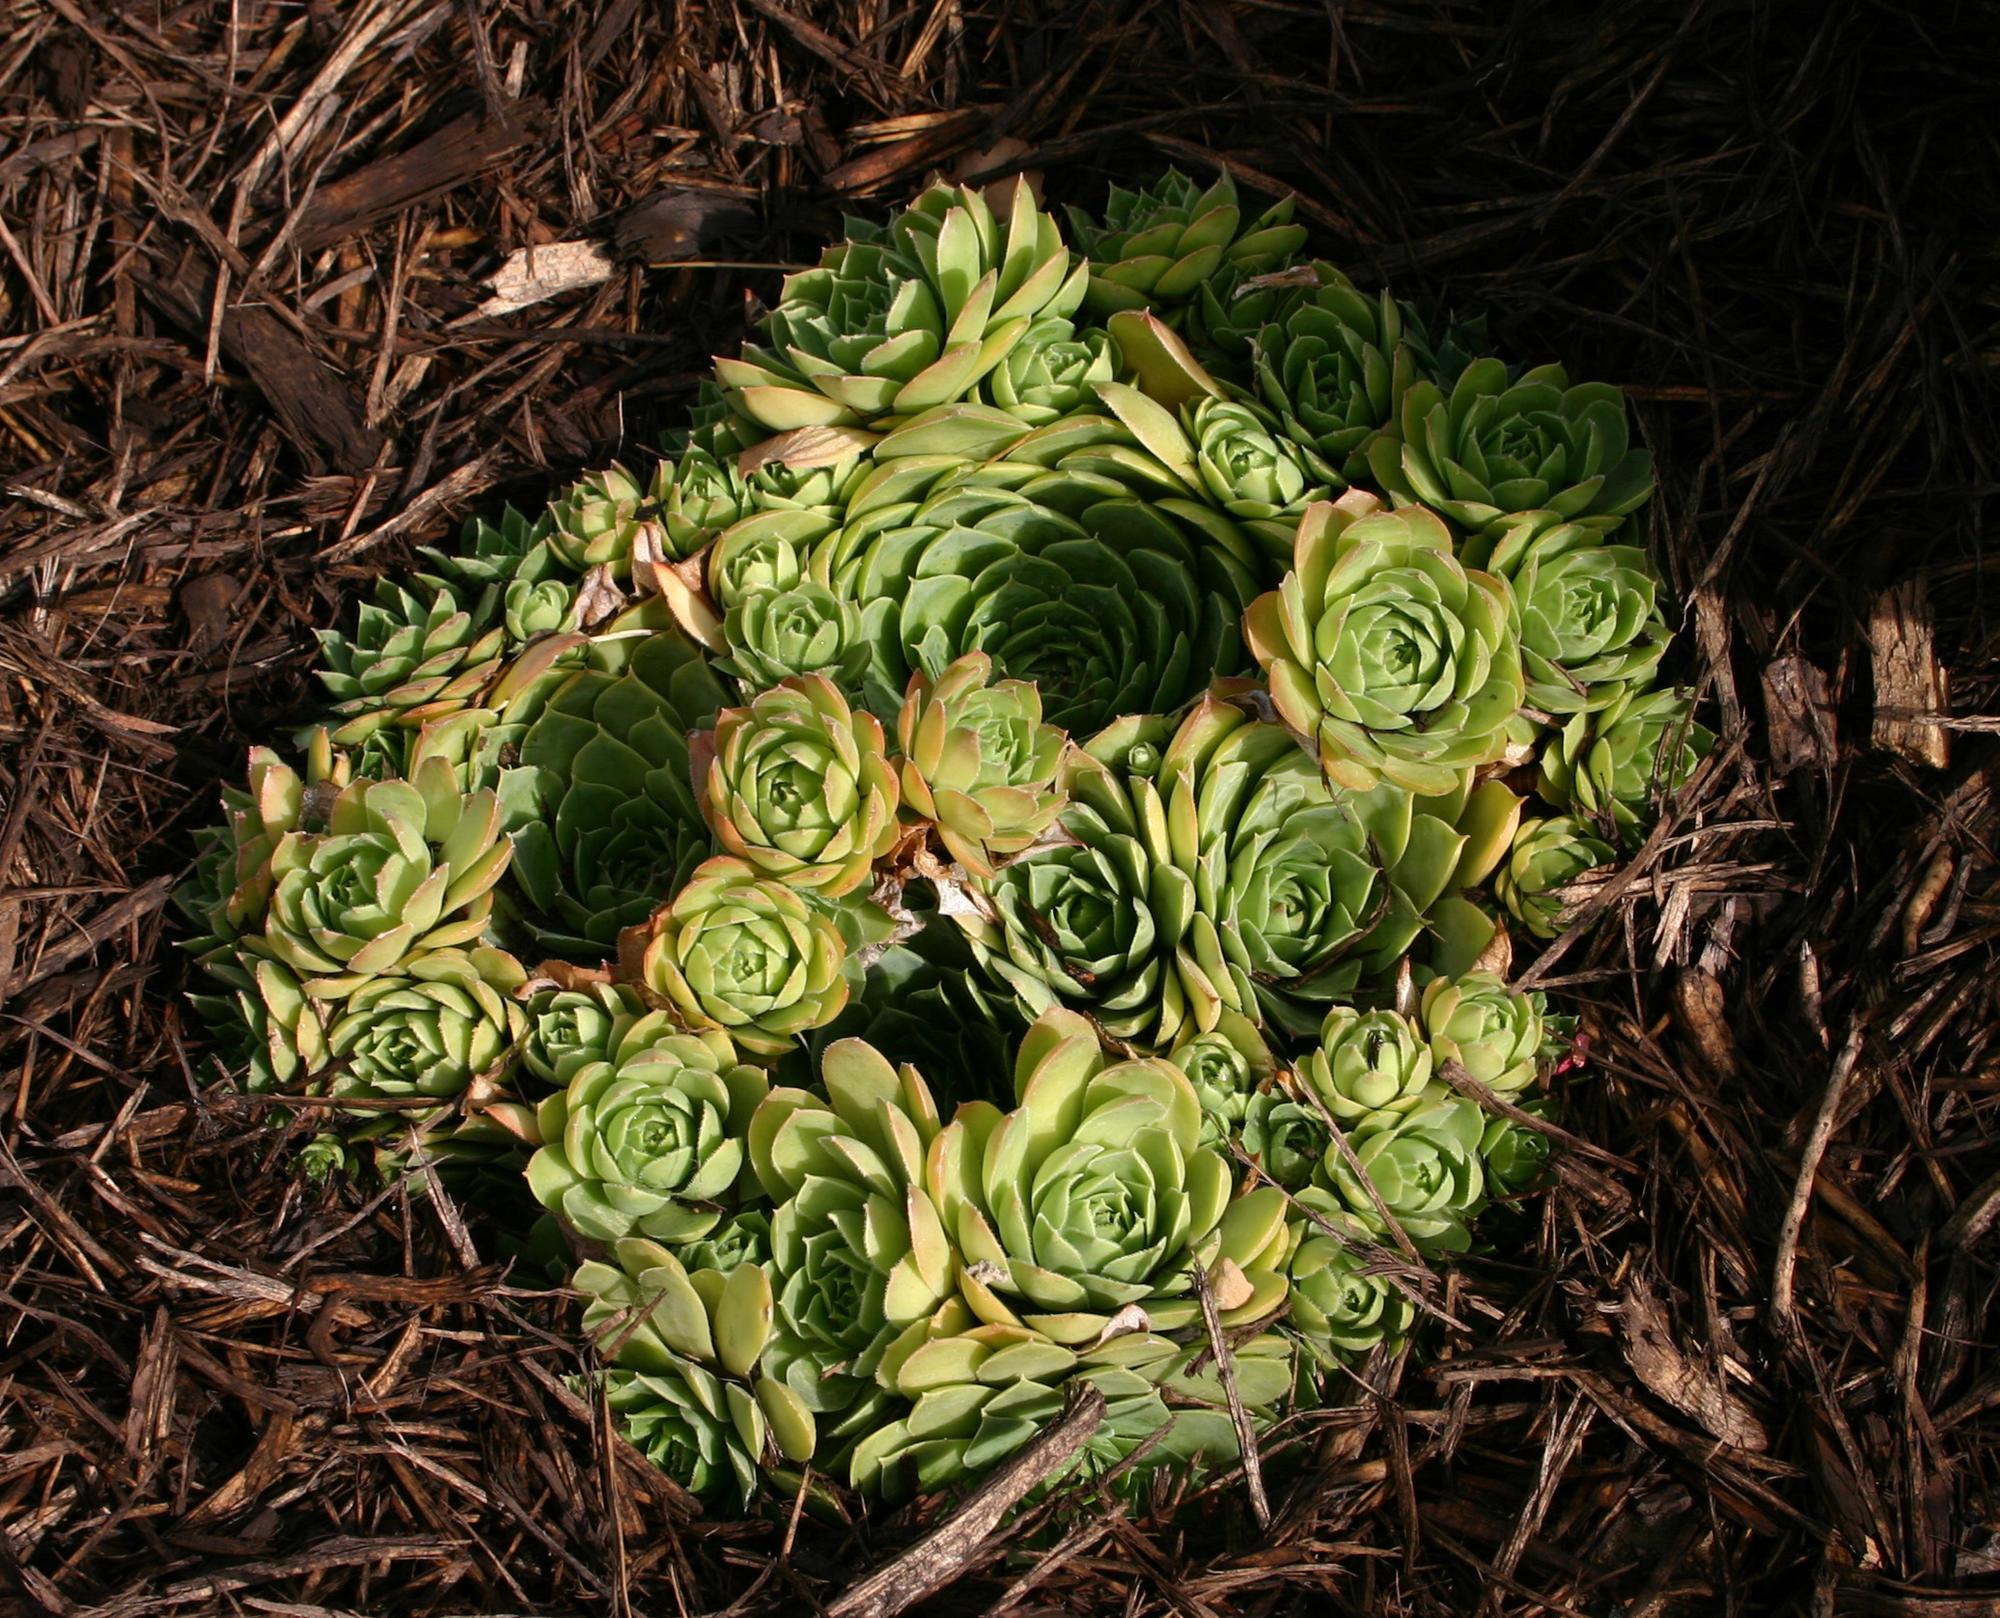 clusters of labyrinth-like circles of succulent green leaves